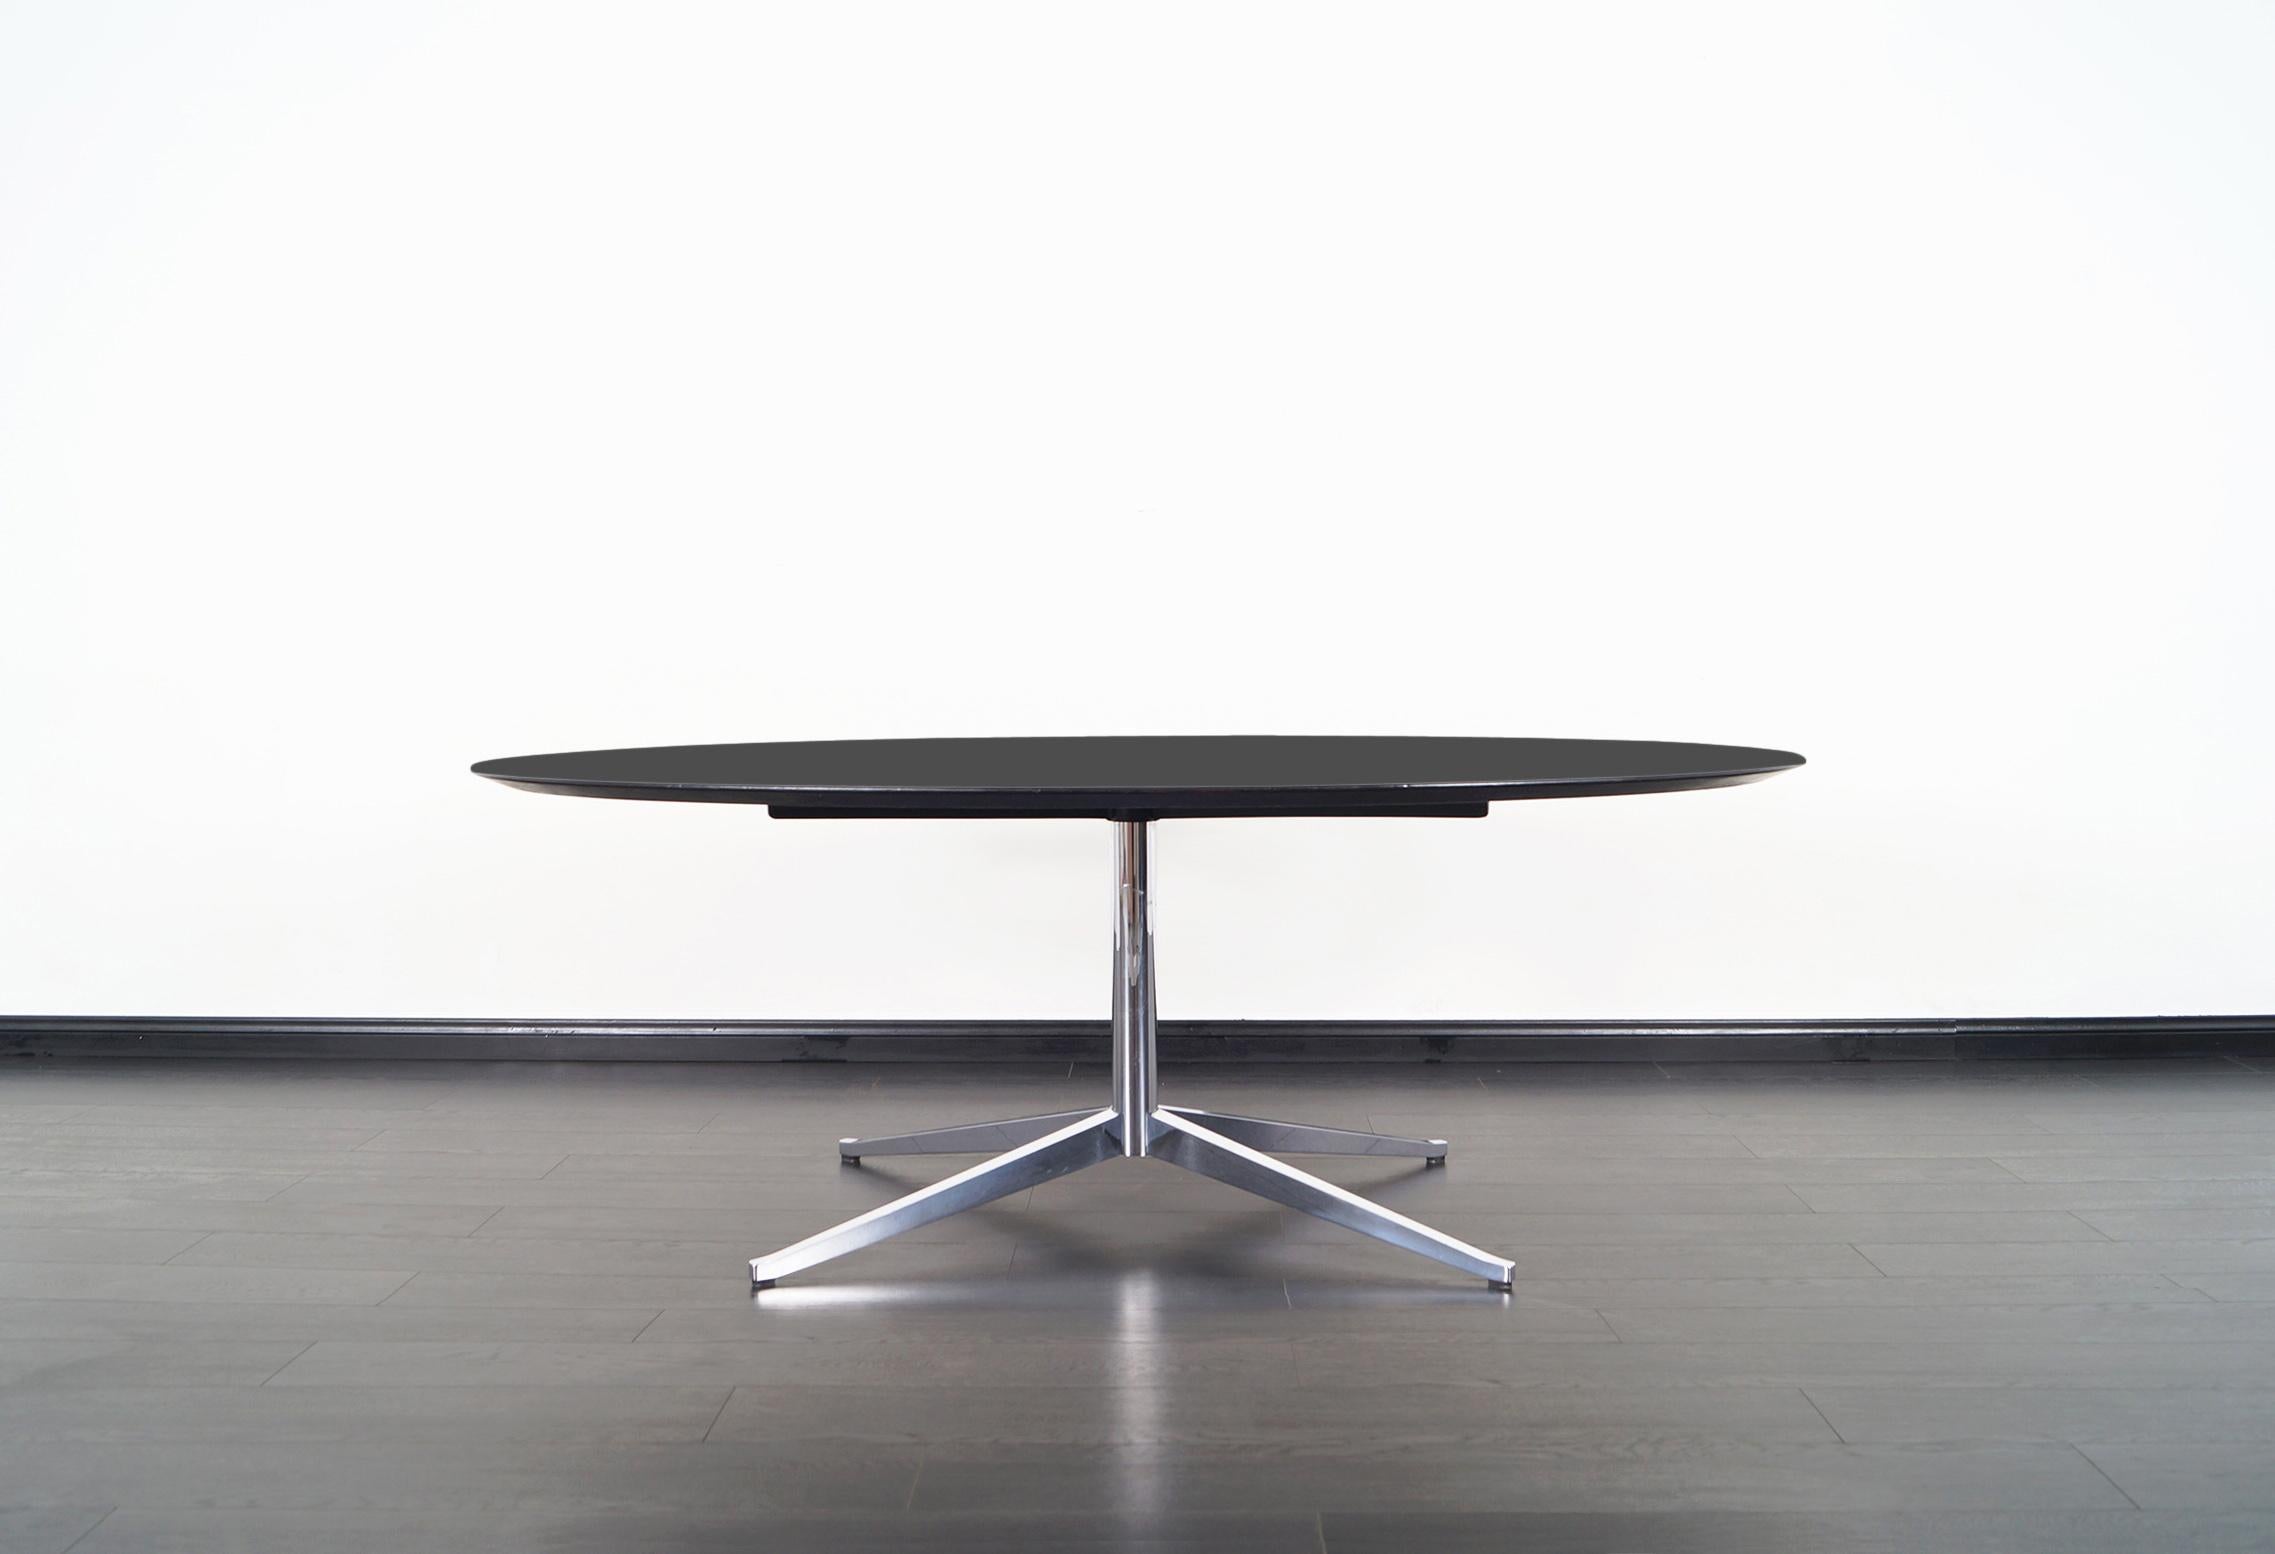 This amazing vintage table was designed by Florence Knoll for Knoll International in the United States, circa 1960s. Its versatile allows it to serve as a desk, dining table, or conference table. This iconic design features an ebonized top that sits